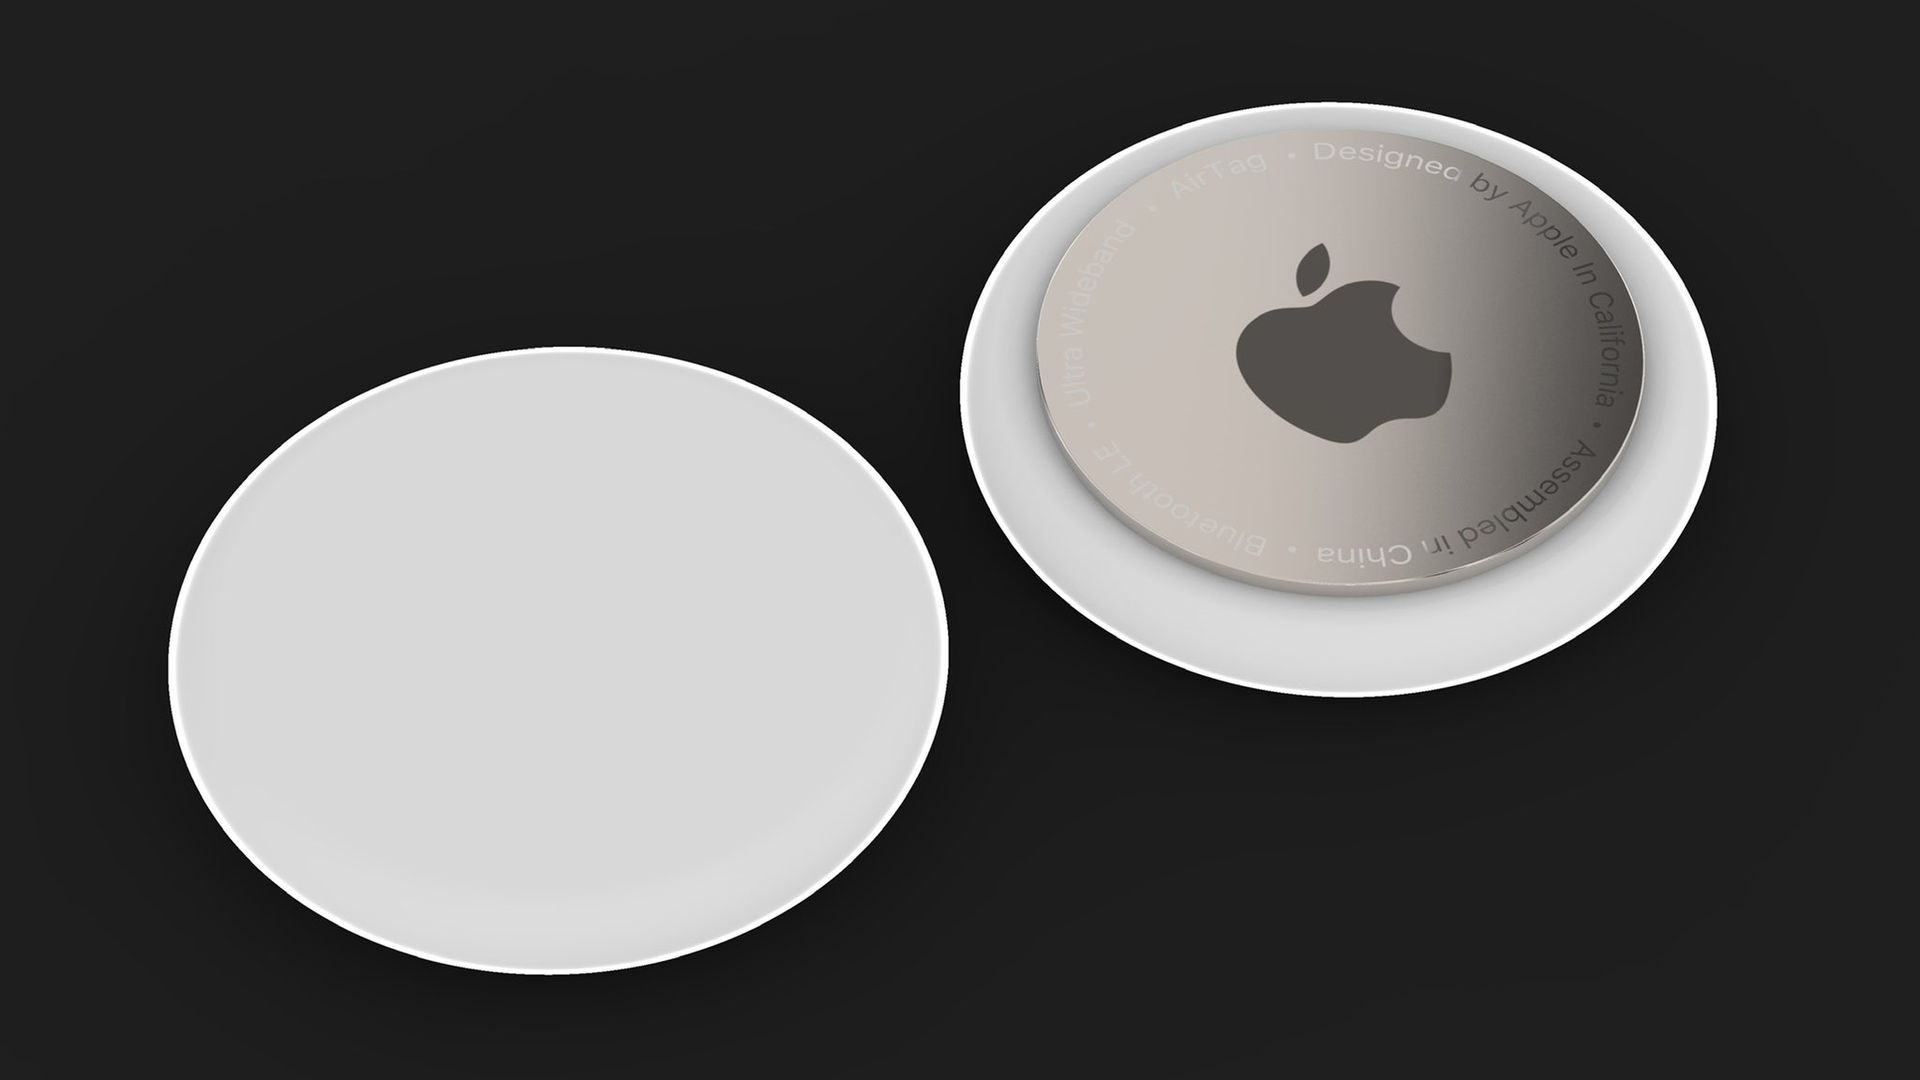 Apple AirTags size and price may have just been revealed in new leak